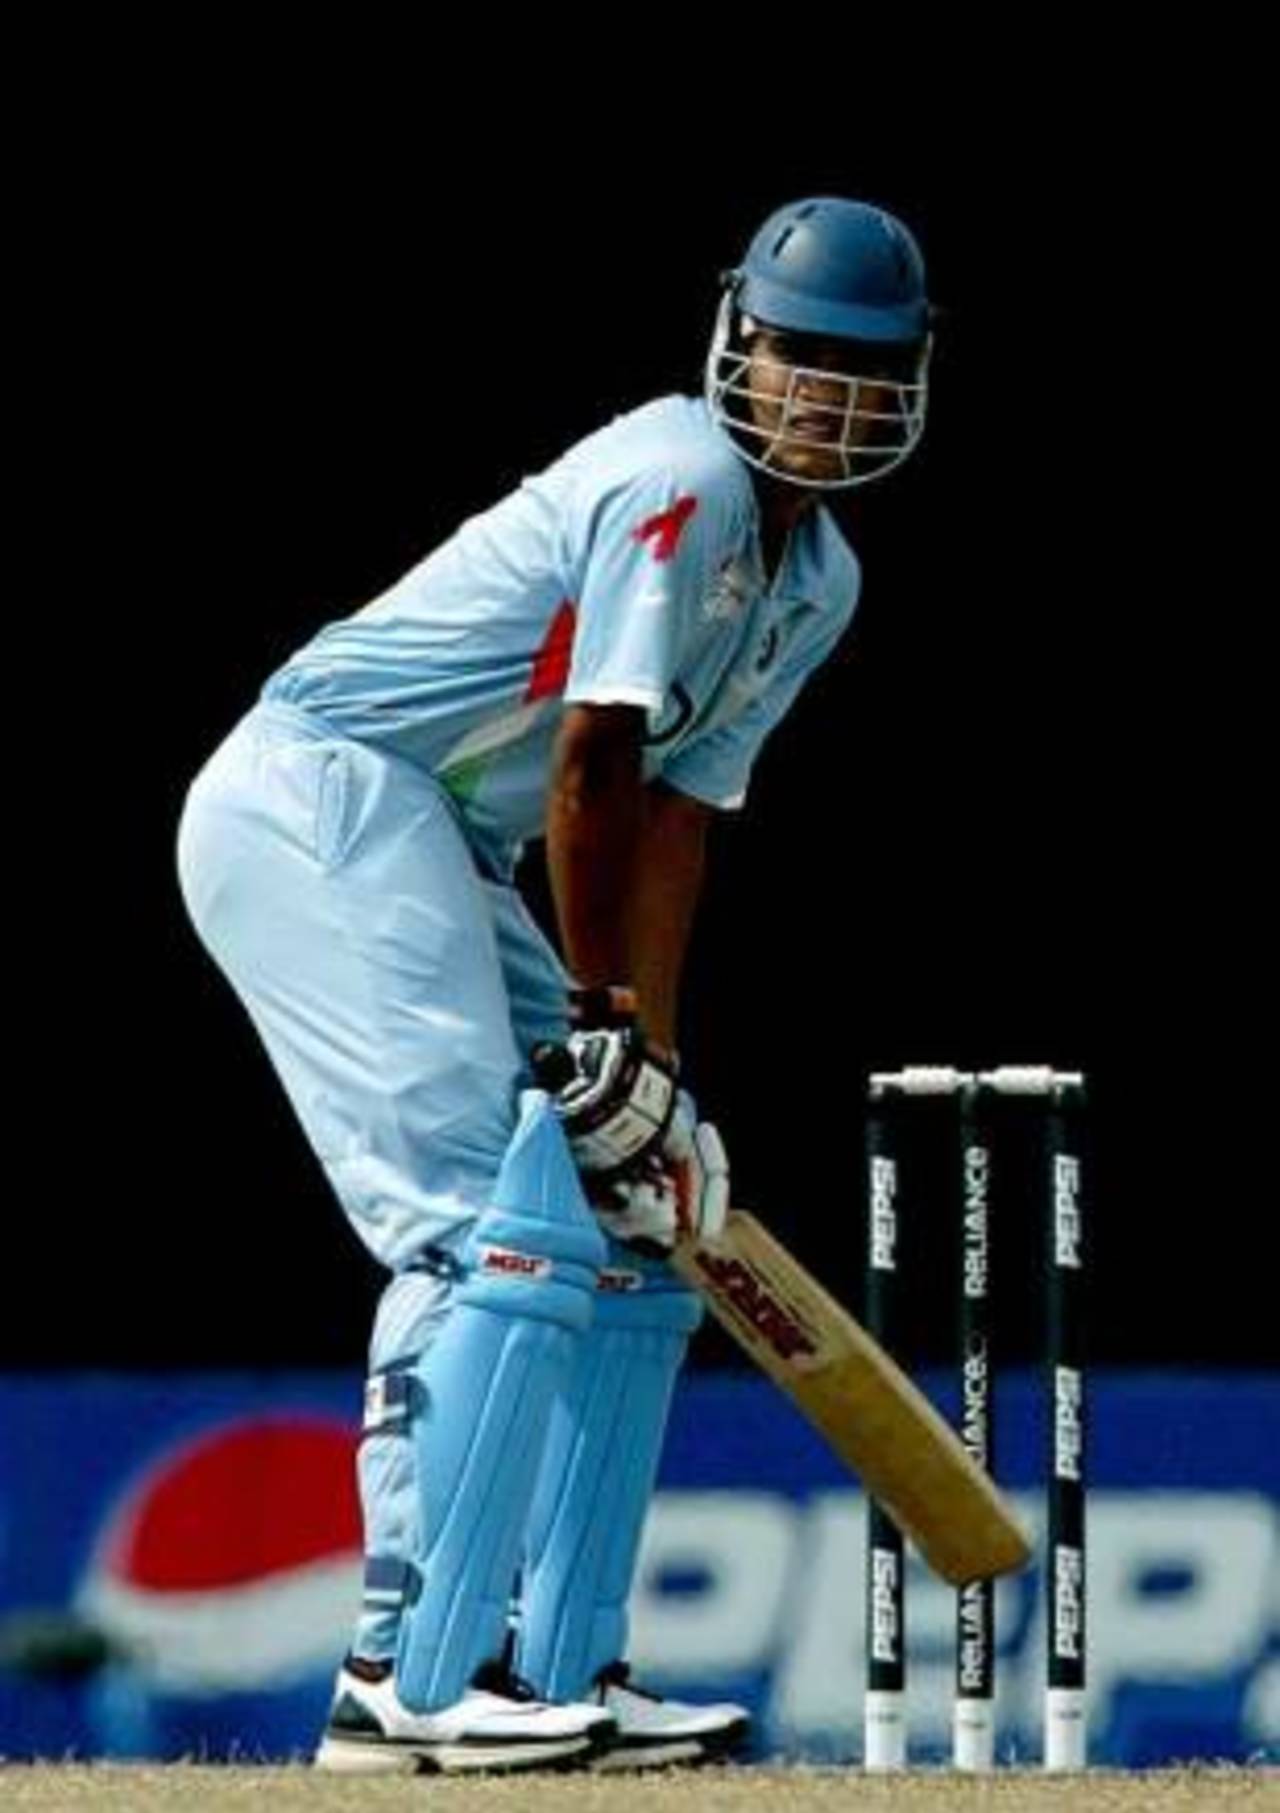 Saurabh Tiwary rose to prominence in the 2008 edition of the Under-19 World Cup, and has been a smash hit for Mumbai Indians in the IPL&nbsp;&nbsp;&bull;&nbsp;&nbsp;Getty Images